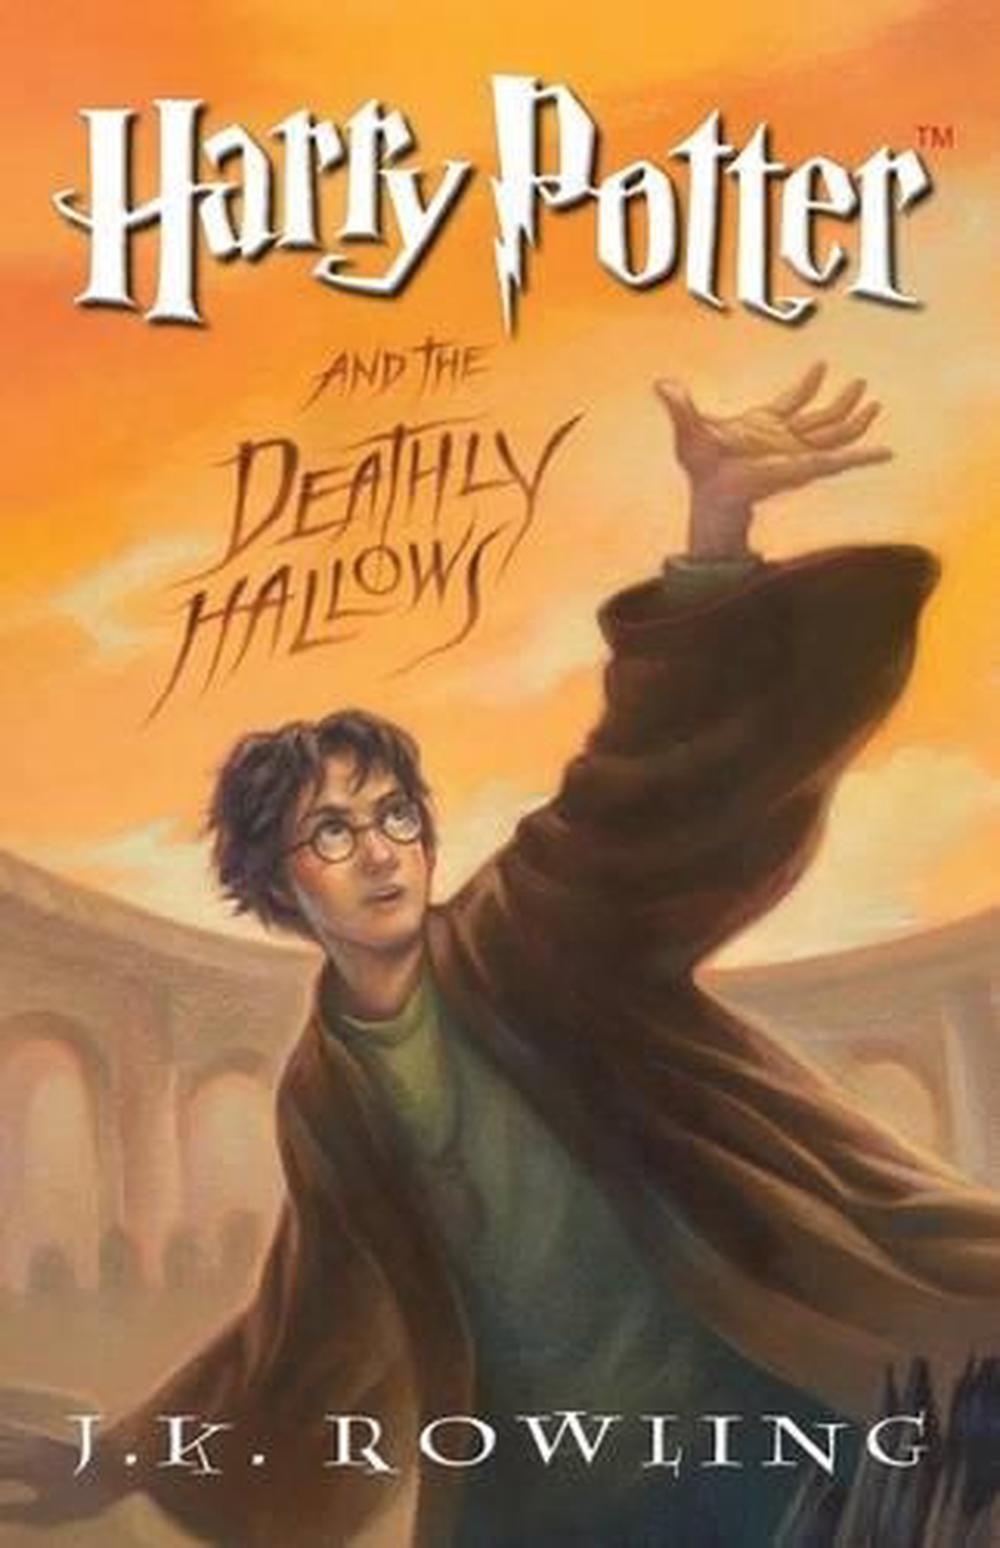 harry potter and the deathly hallows full audiobook